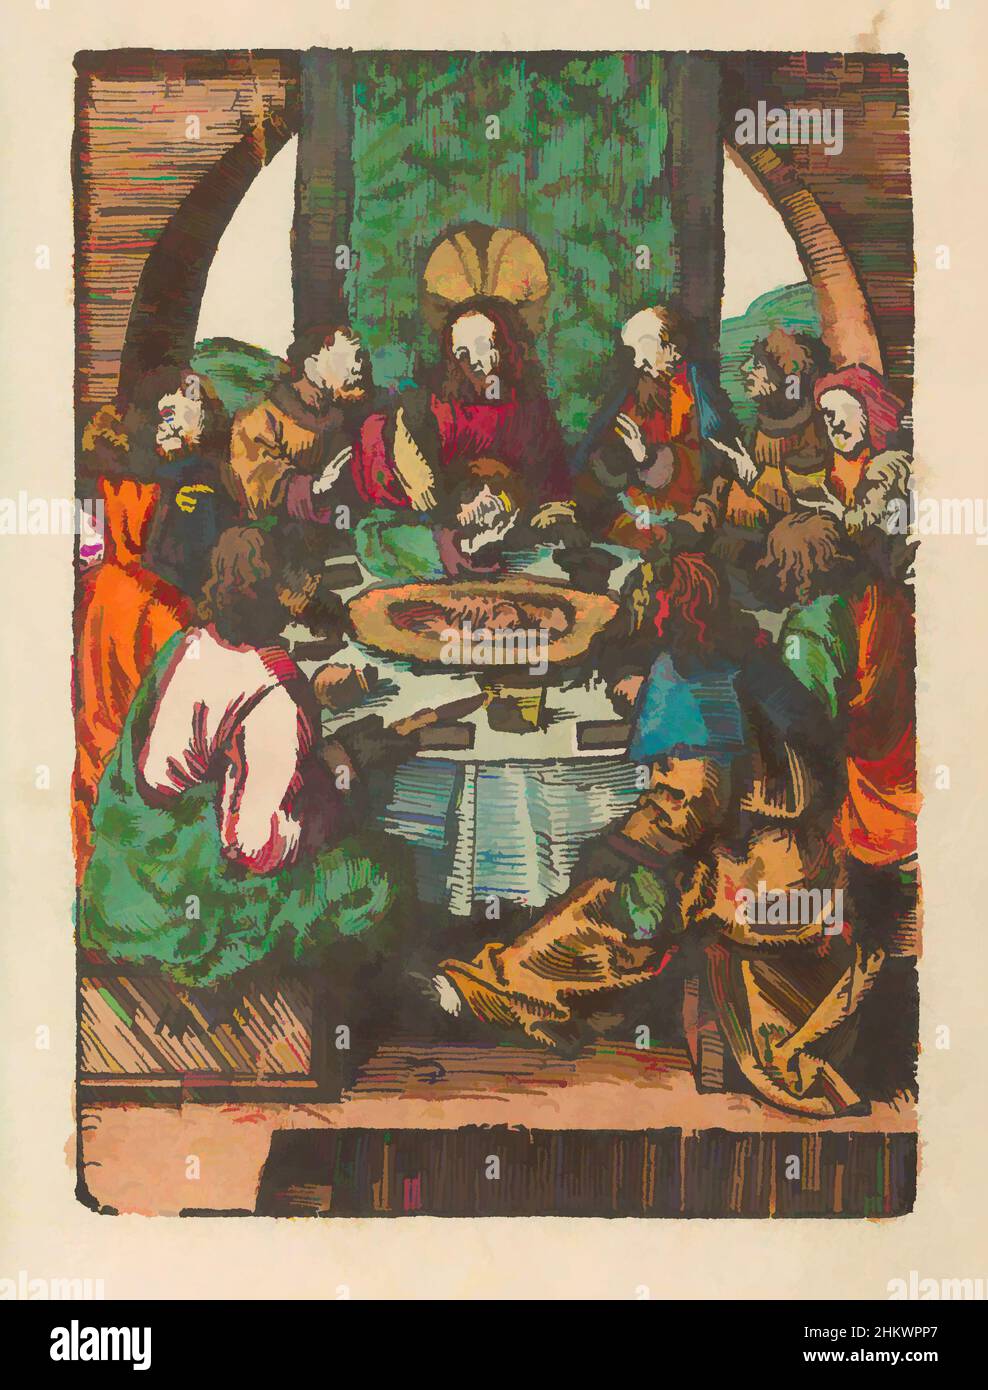 Art inspired by Last Supper, The Little Passion (series title), Stupid Passion (series title), Christ sits with his disciples at the Last Supper. John lays his head against Christ's chest. The paschal lamb lies on a platter on the table. In the foreground Judas with the bag of silver, Classic works modernized by Artotop with a splash of modernity. Shapes, color and value, eye-catching visual impact on art. Emotions through freedom of artworks in a contemporary way. A timeless message pursuing a wildly creative new direction. Artists turning to the digital medium and creating the Artotop NFT Stock Photo